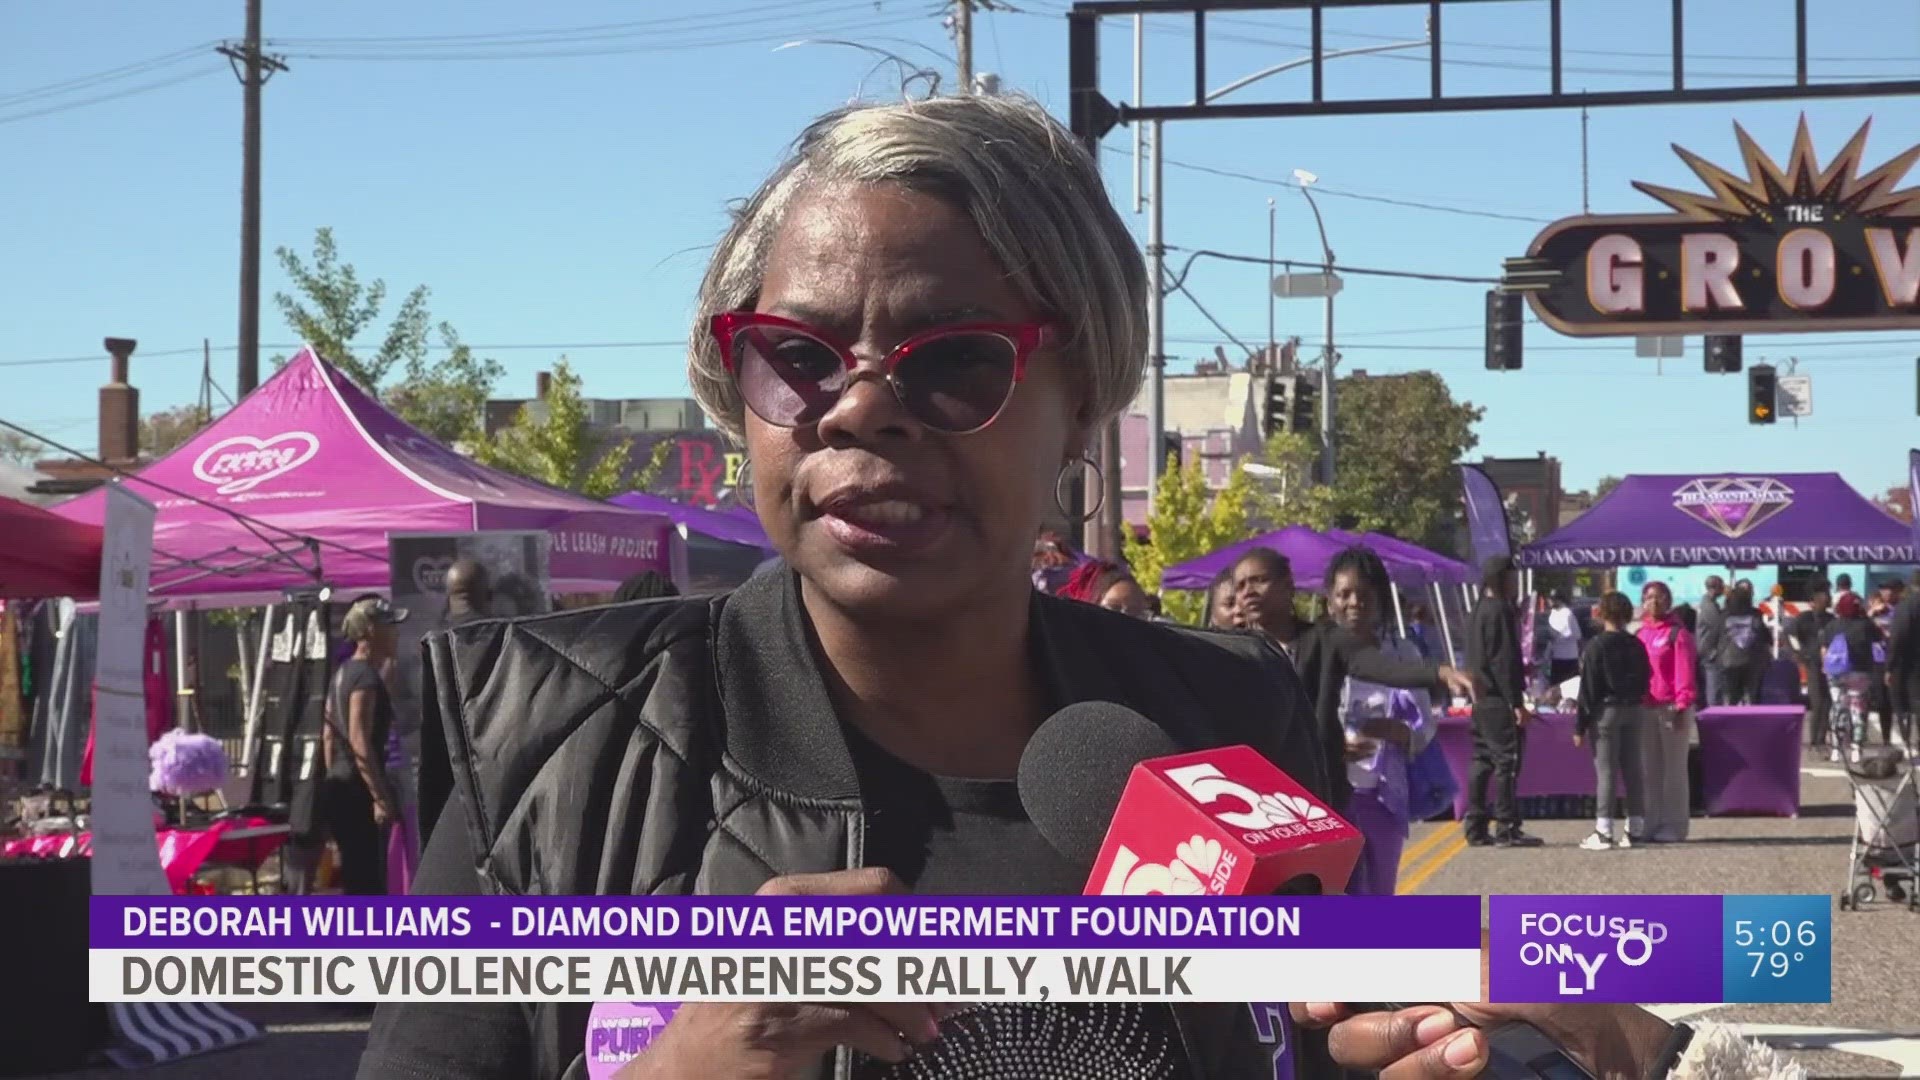 Diamond Diva Empowerment Foundation hosted its 3rd Annual Domestic Violence Awareness rally and walk.